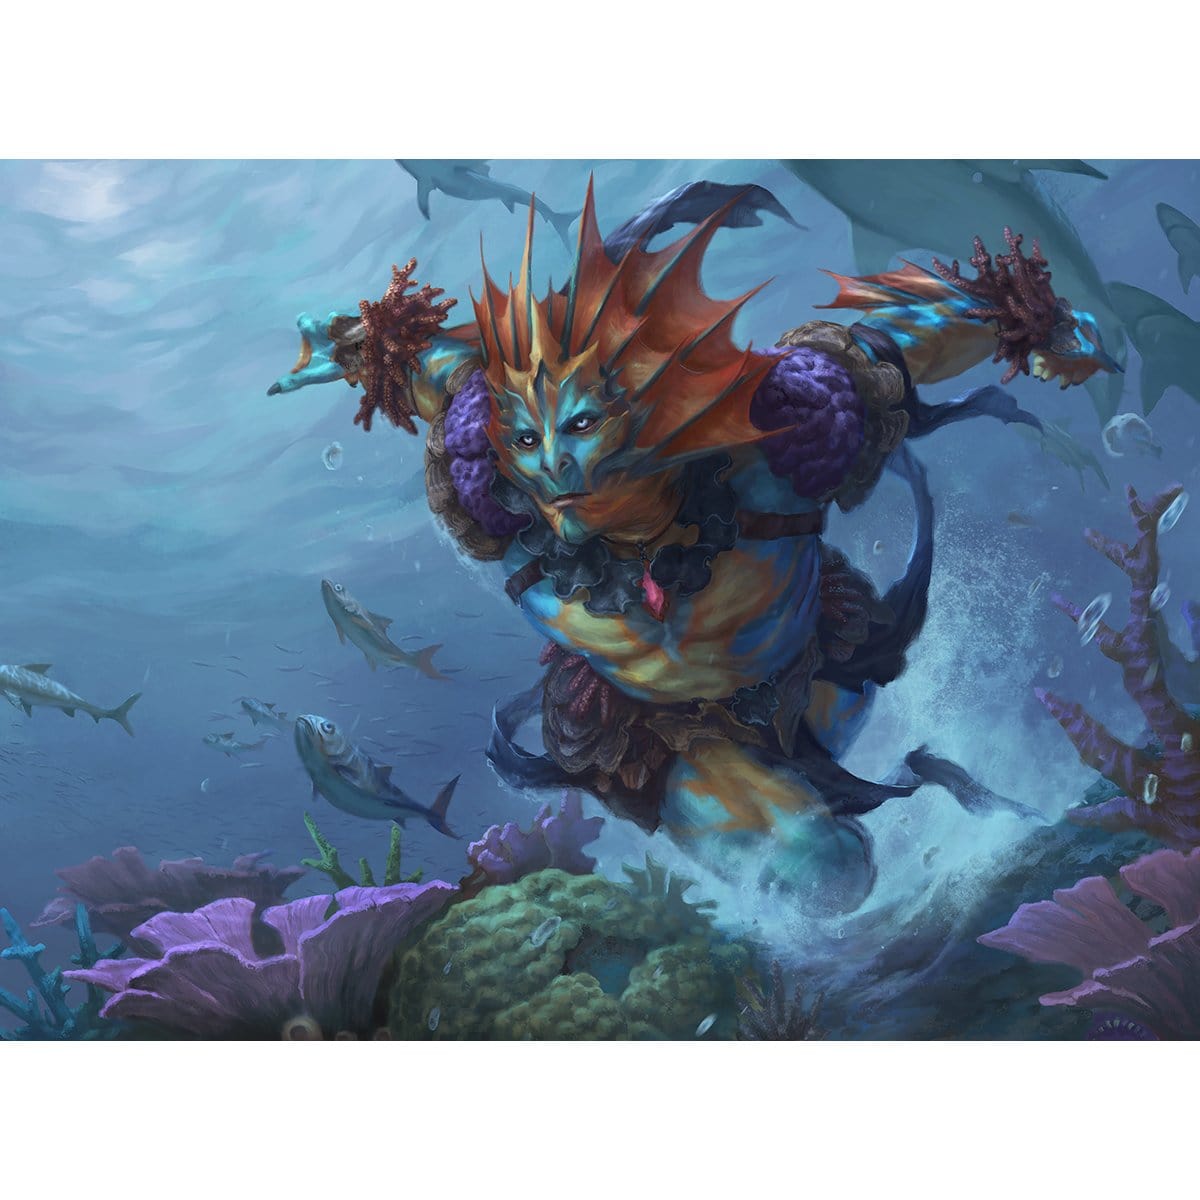 Coral Merfolk Print - Print - Original Magic Art - Accessories for Magic the Gathering and other card games